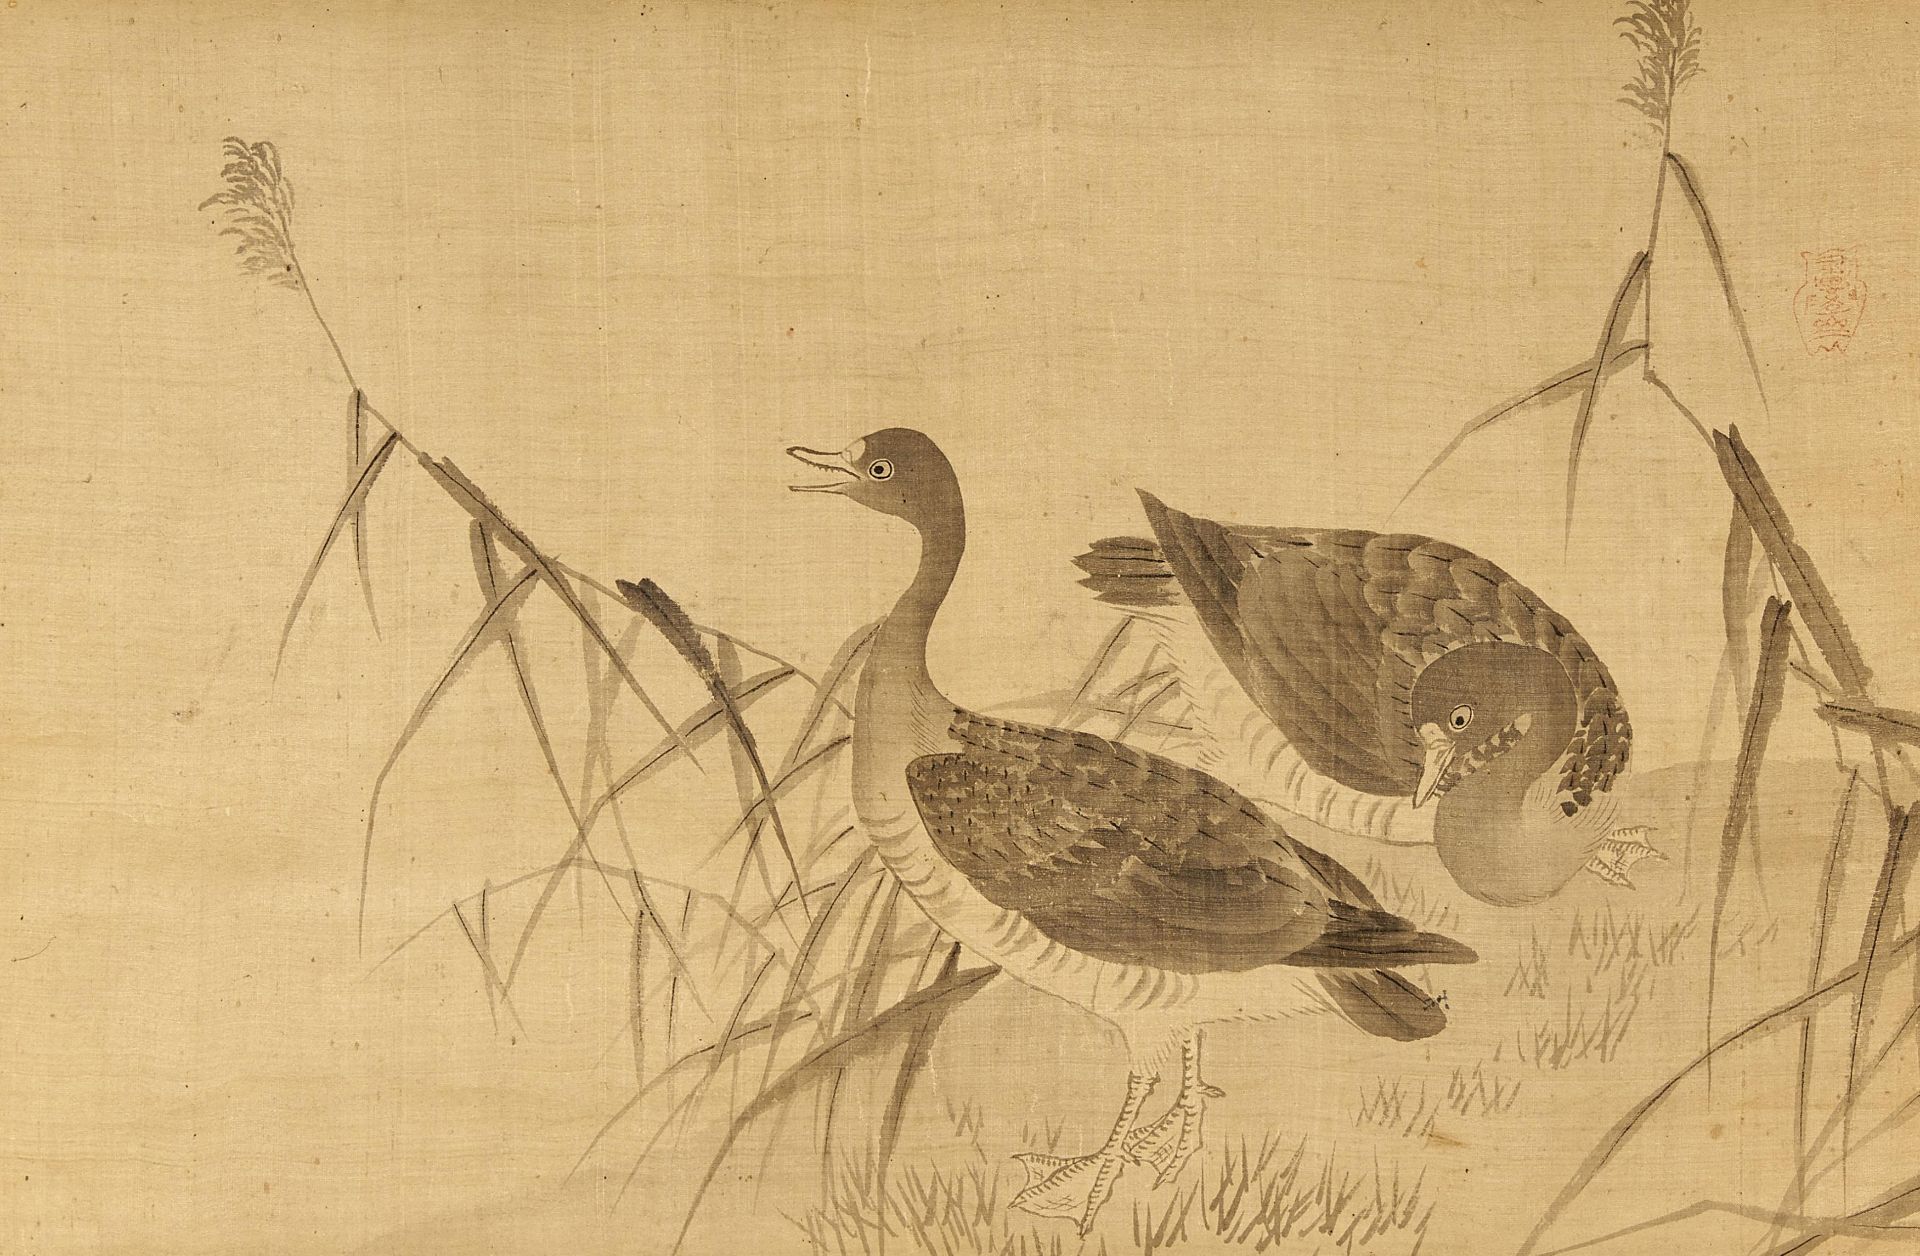 THREE HANGING PICTURES WITH BIRDS. Japan. 19th c. Ink on silk/paper. Mounted as hanging scroll. - Image 2 of 4